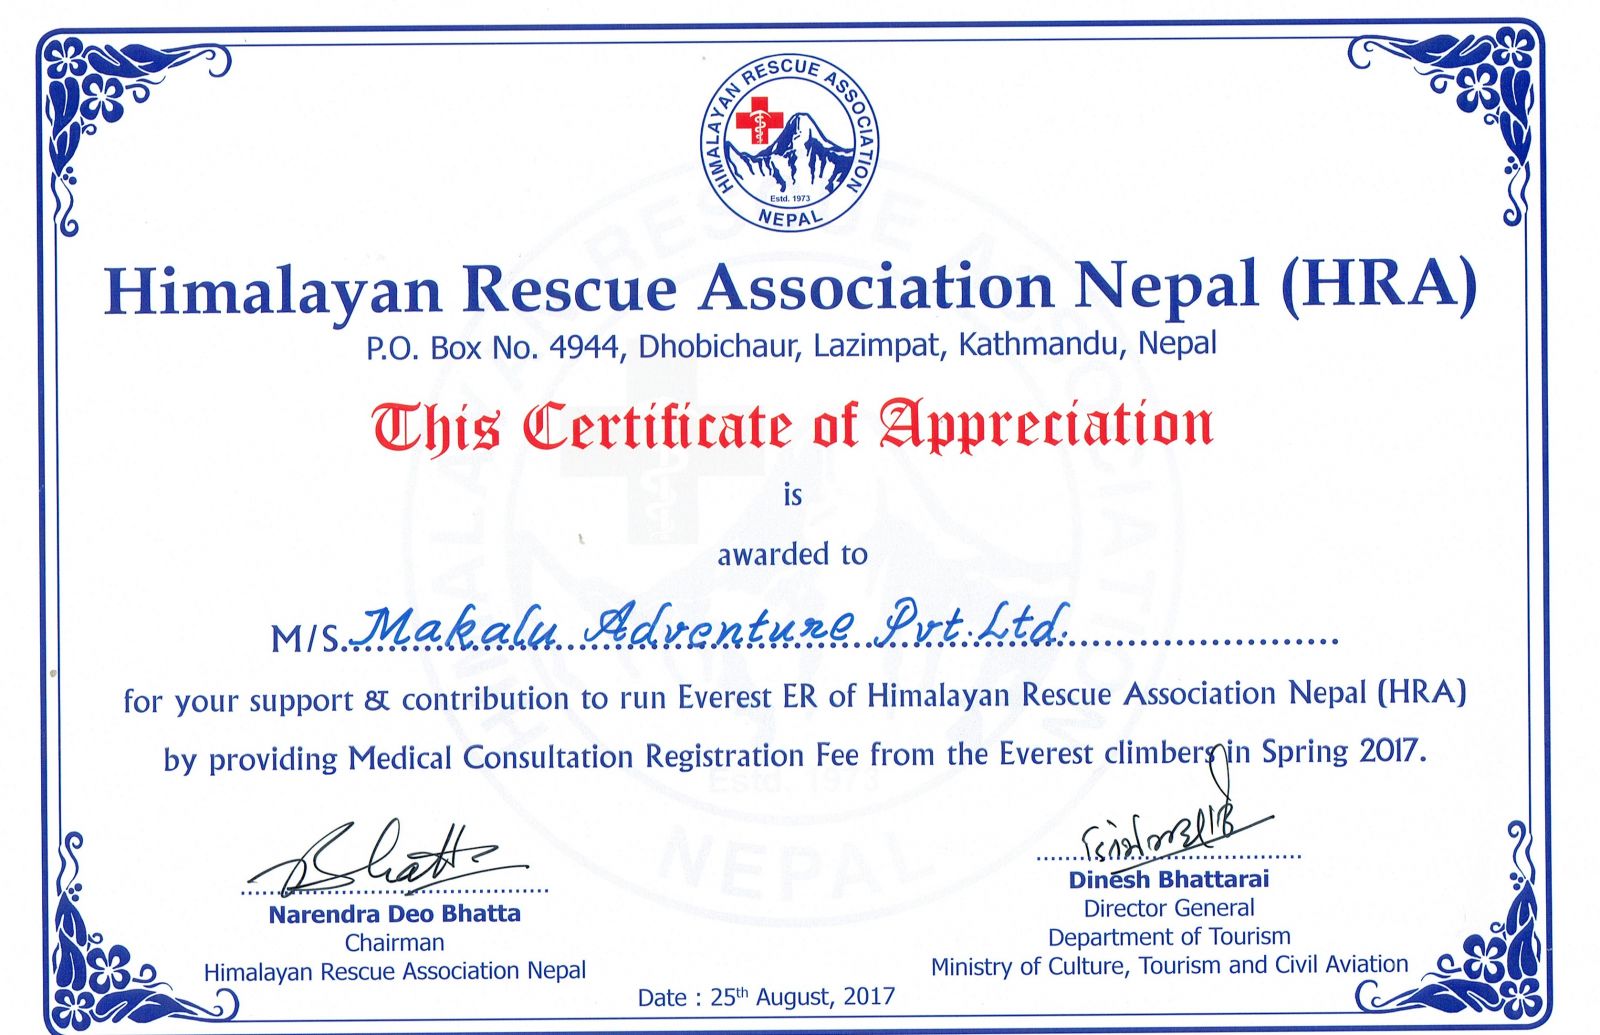 Support and Contribution to Run Himalayan Rescue Association Nepal